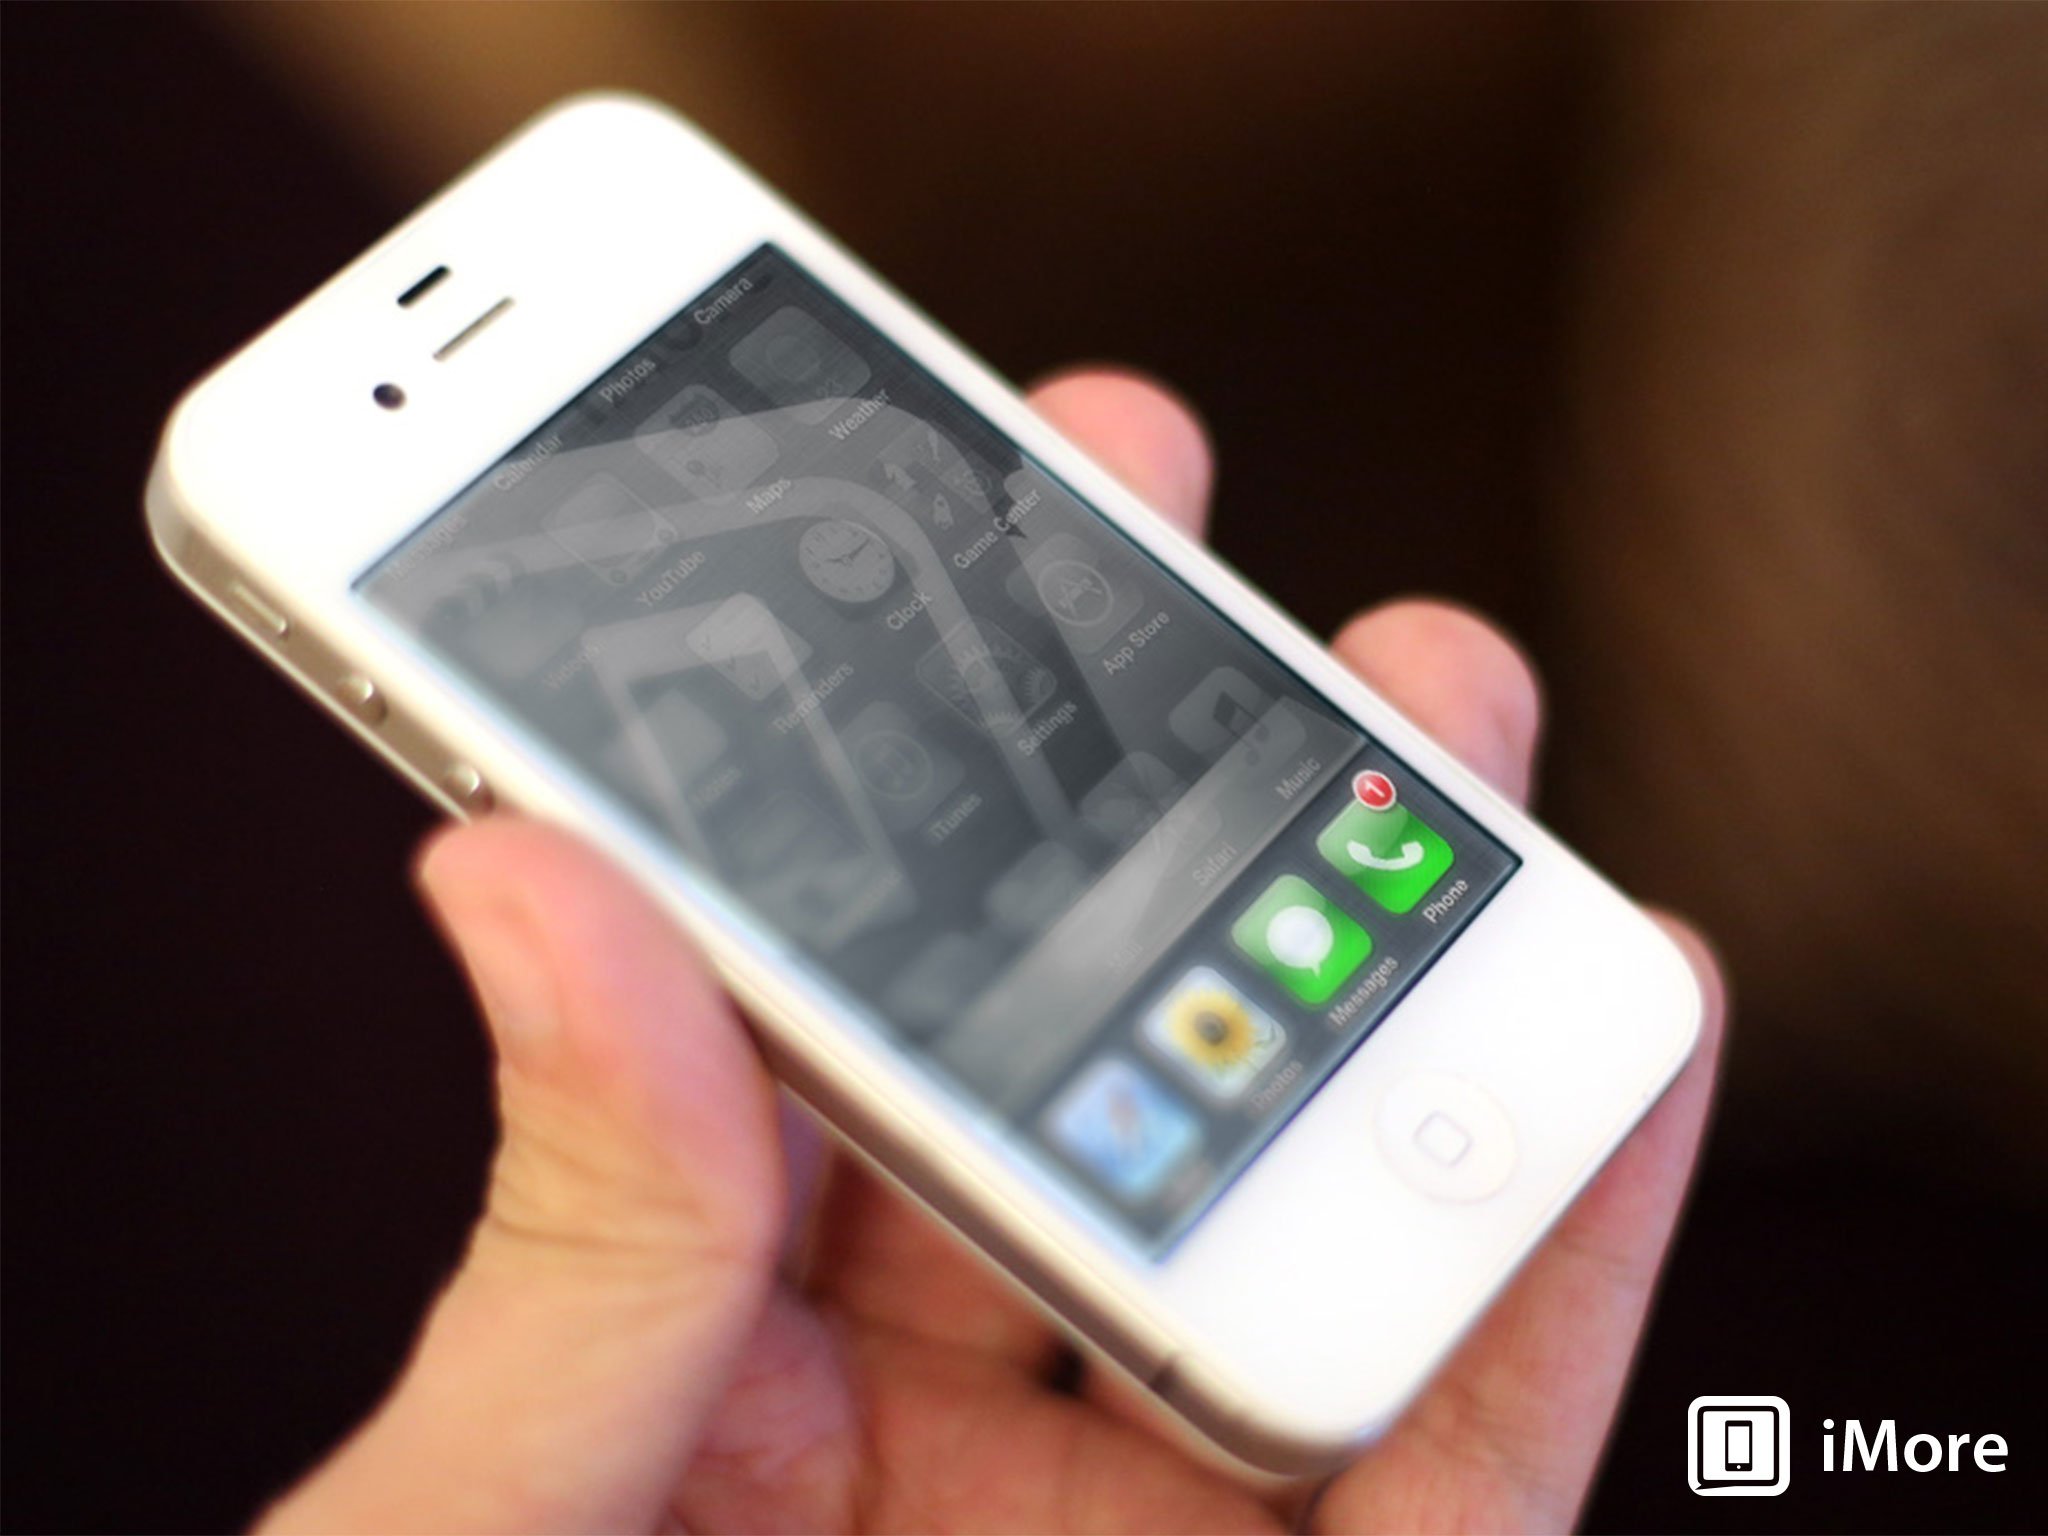 Complete review of Apple's iOS 4.2 software for iPhone and iPod touch